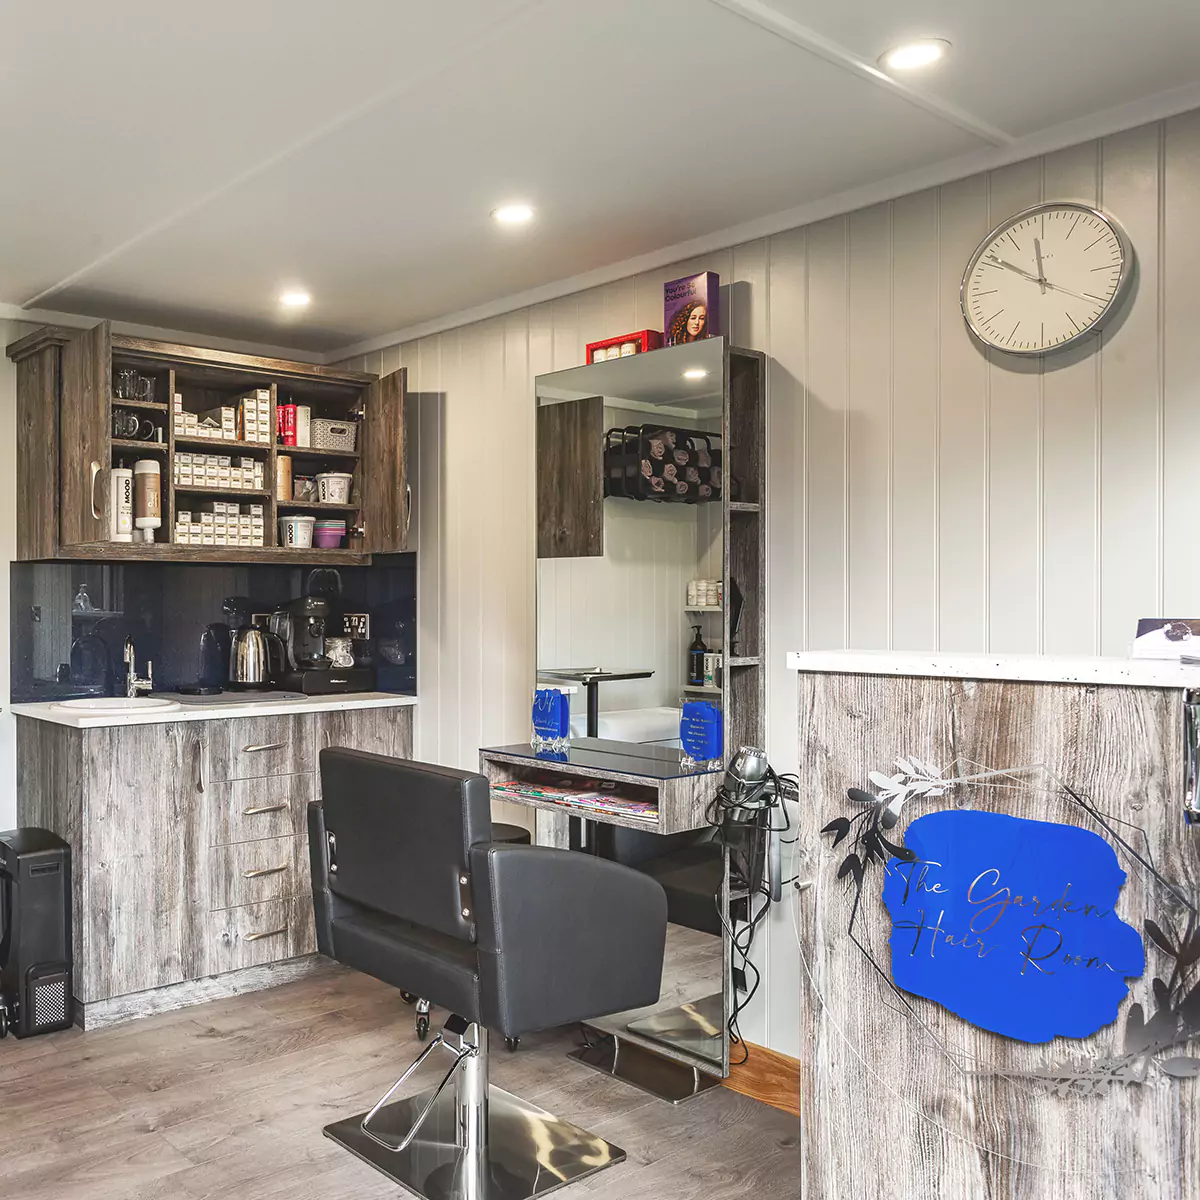 Hairdresser Salon with marble worktops and shelving and large vanity mirror with black leather hairdresser chair and wall clock